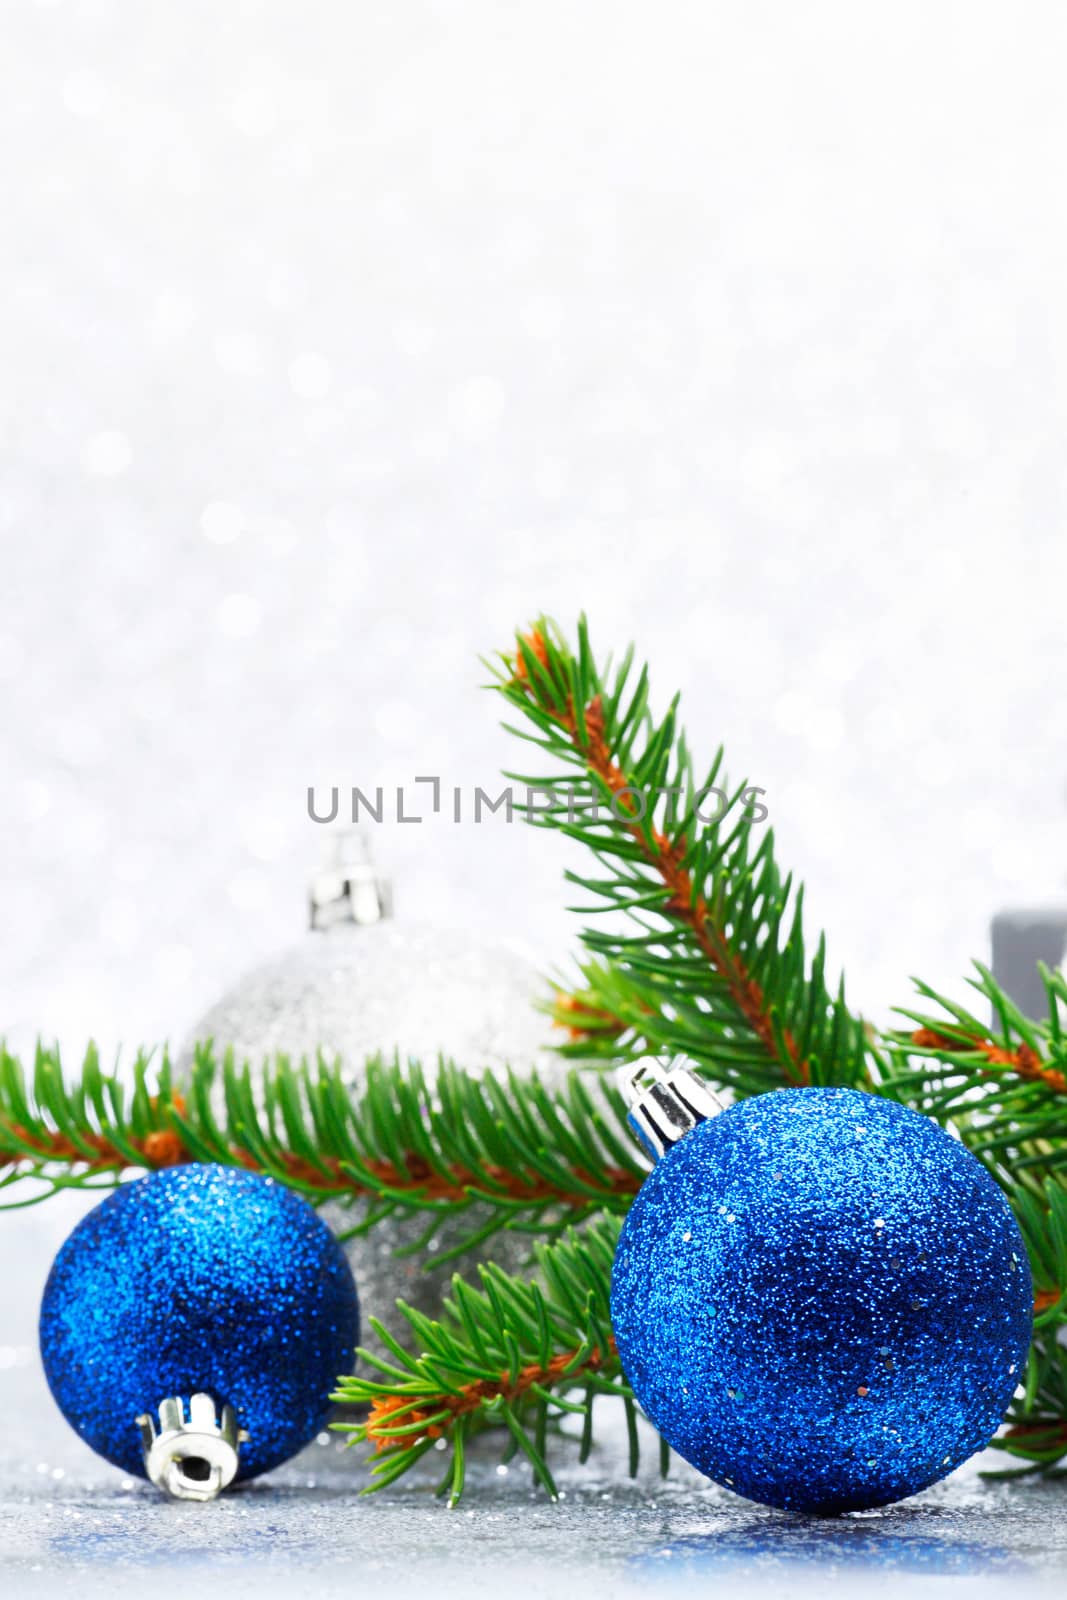 Firtree and christmas decor on glitter silver background